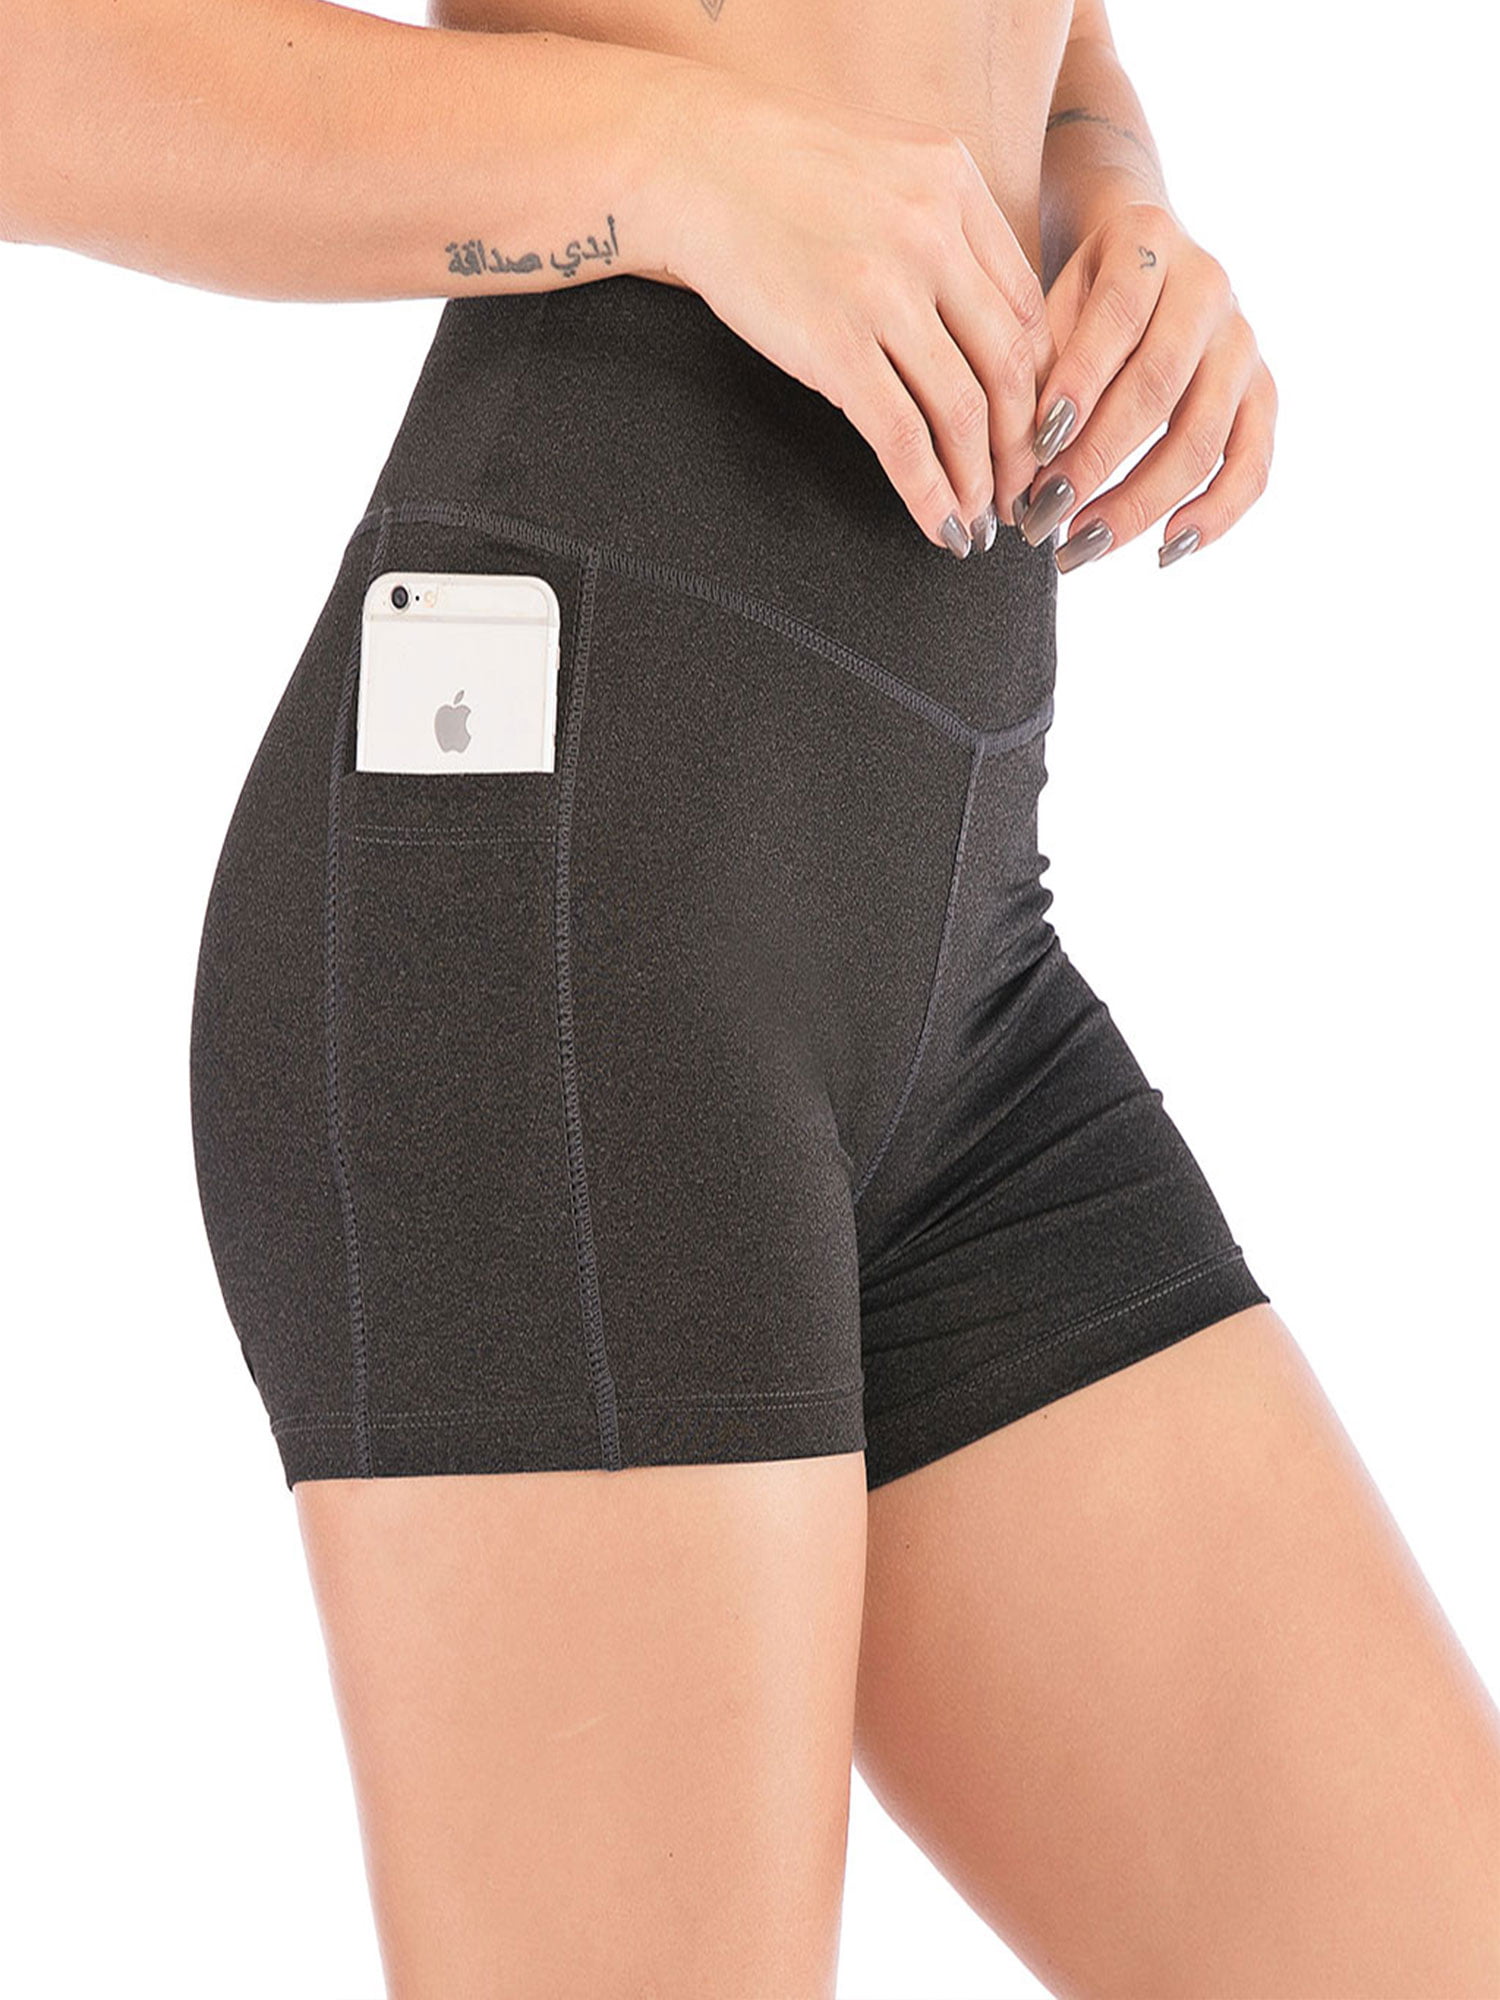 Women's High Waist Yoga Shorts Workout Running Athletic with Pockets Yoga Pants 